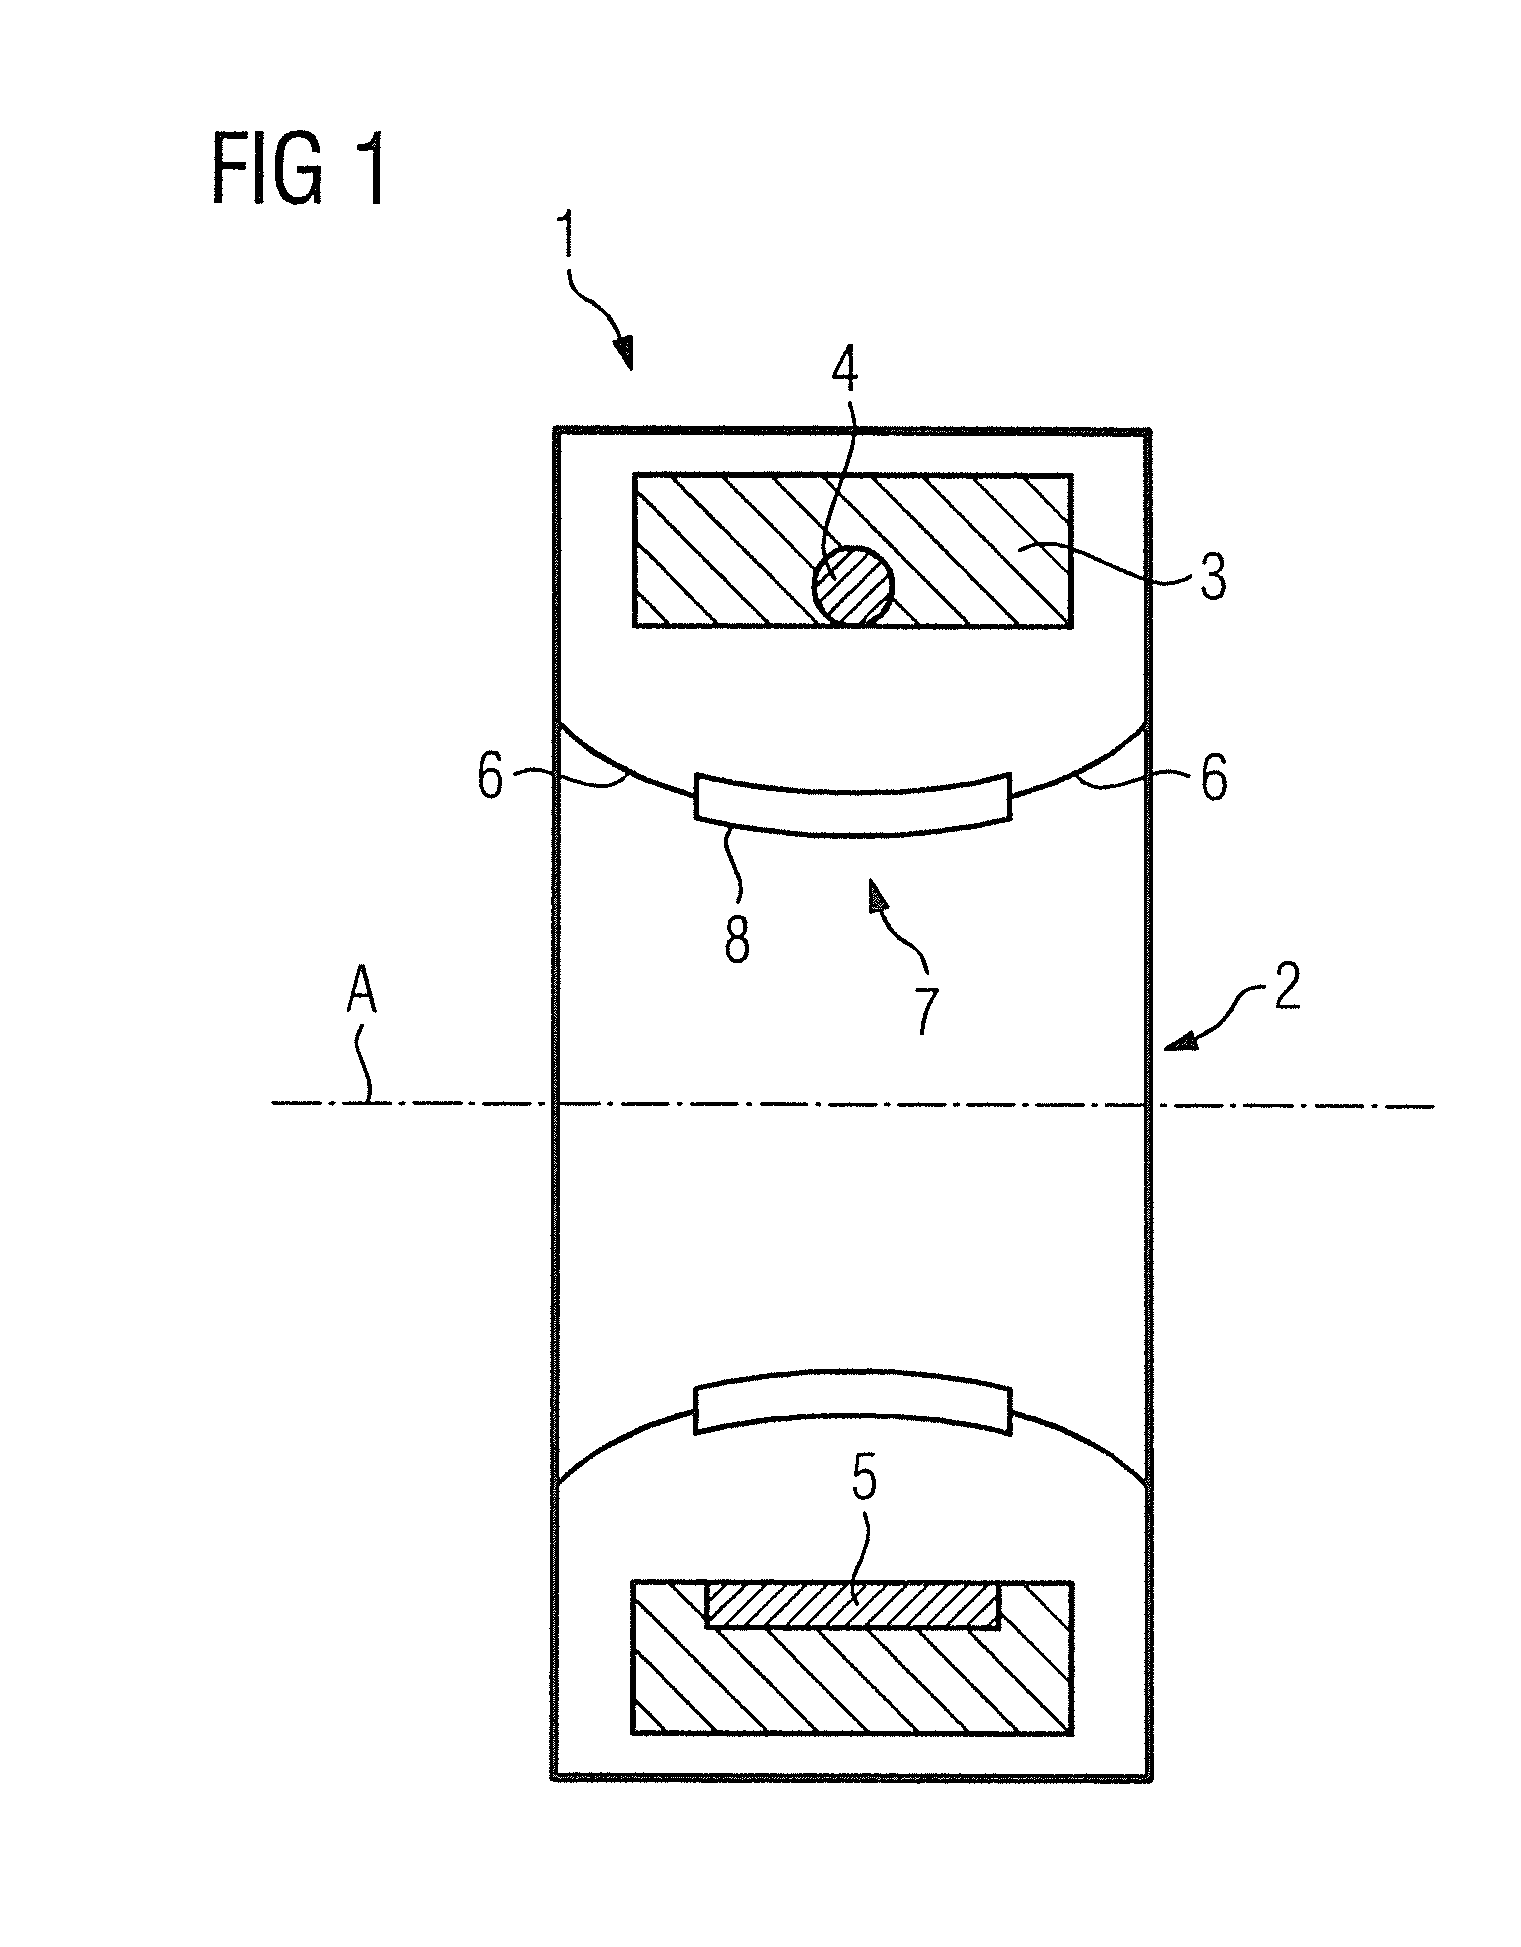 X-ray-generating medical apparatus and acquisition window therefor with a releasable attachment to the medical apparatus